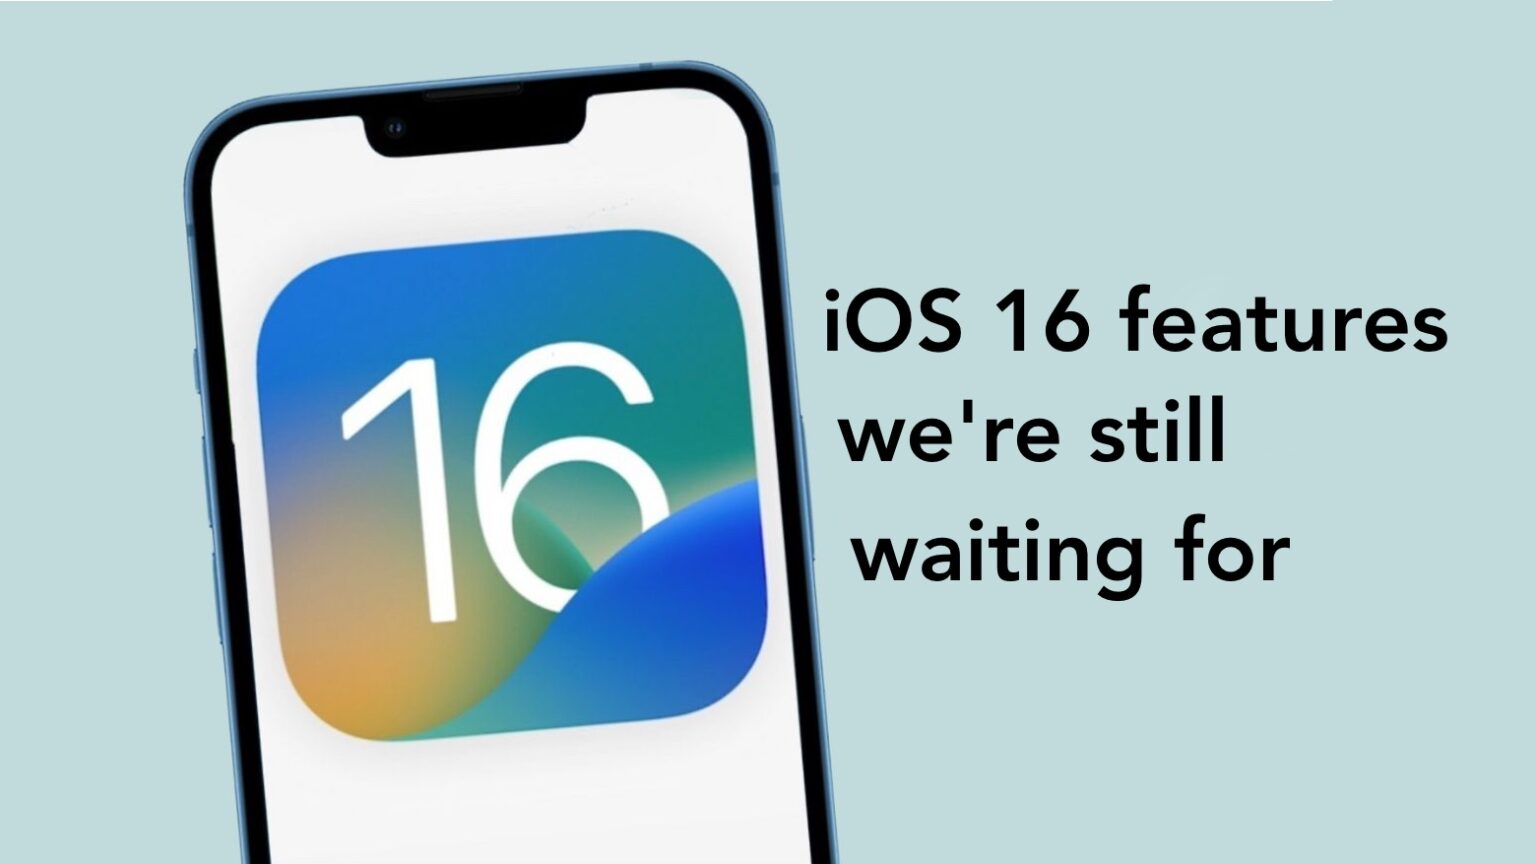 These are the iOS 16 features we’re still waiting for